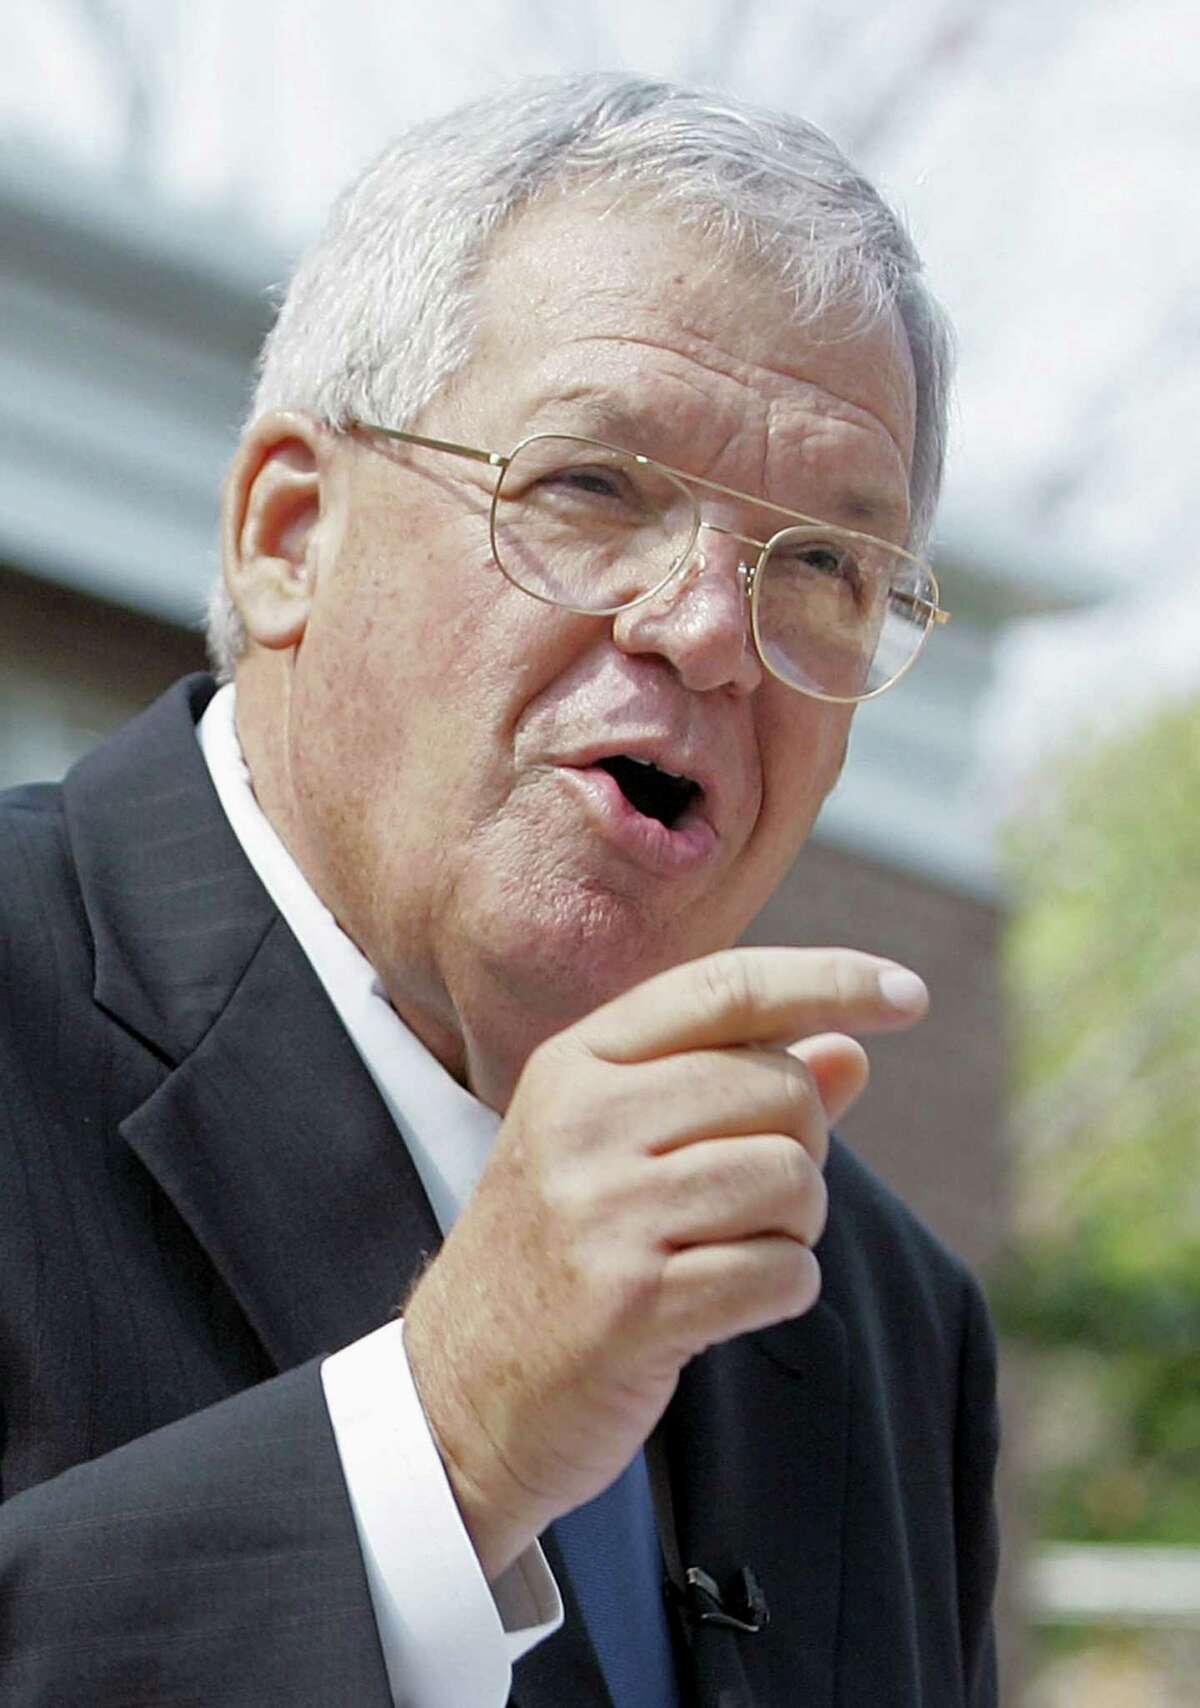 In this Aug. 17, 2007, file photo, former House Speaker Dennis Hastert, R-Ill., announces that he will not seek re-election for a 12th term in Yorkville, Ill. Federal prosecutors eventually indicted the former U.S. House Speaker on bank-related charges.